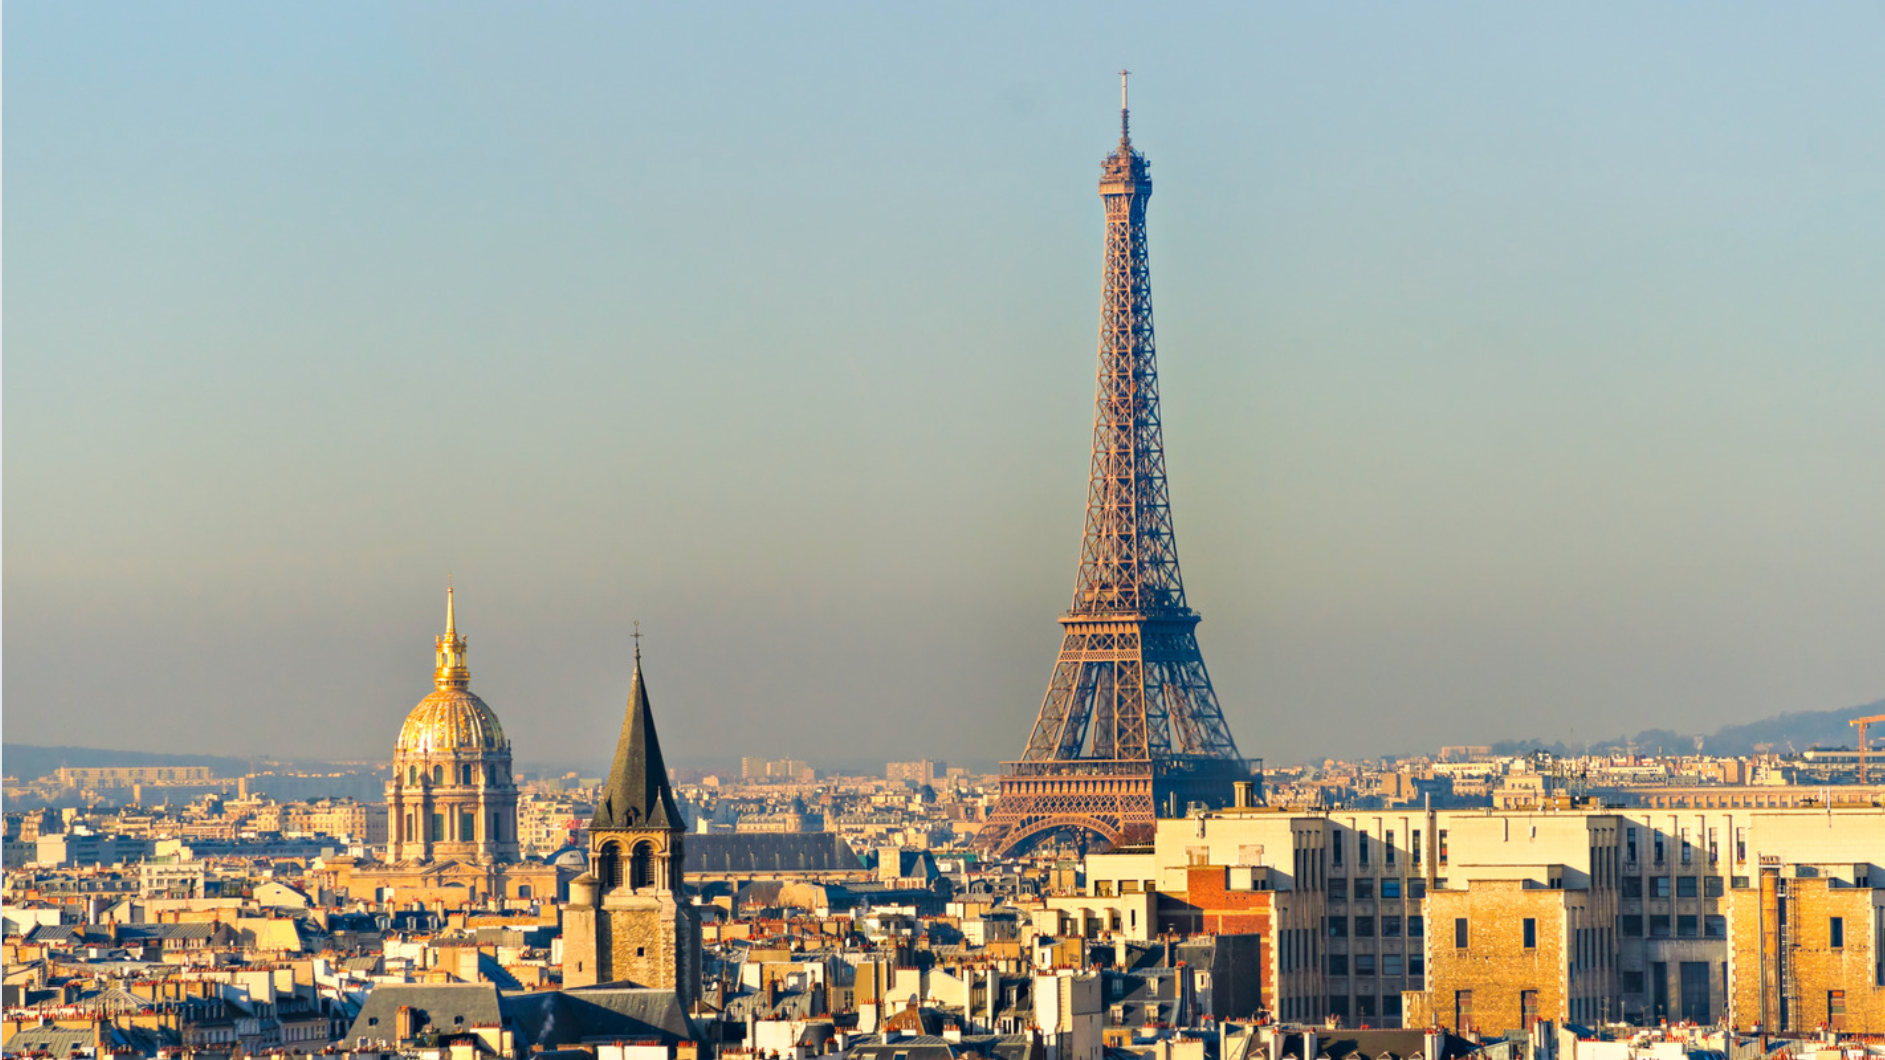 A view of the Paris skyline including the Eiffel Tower.